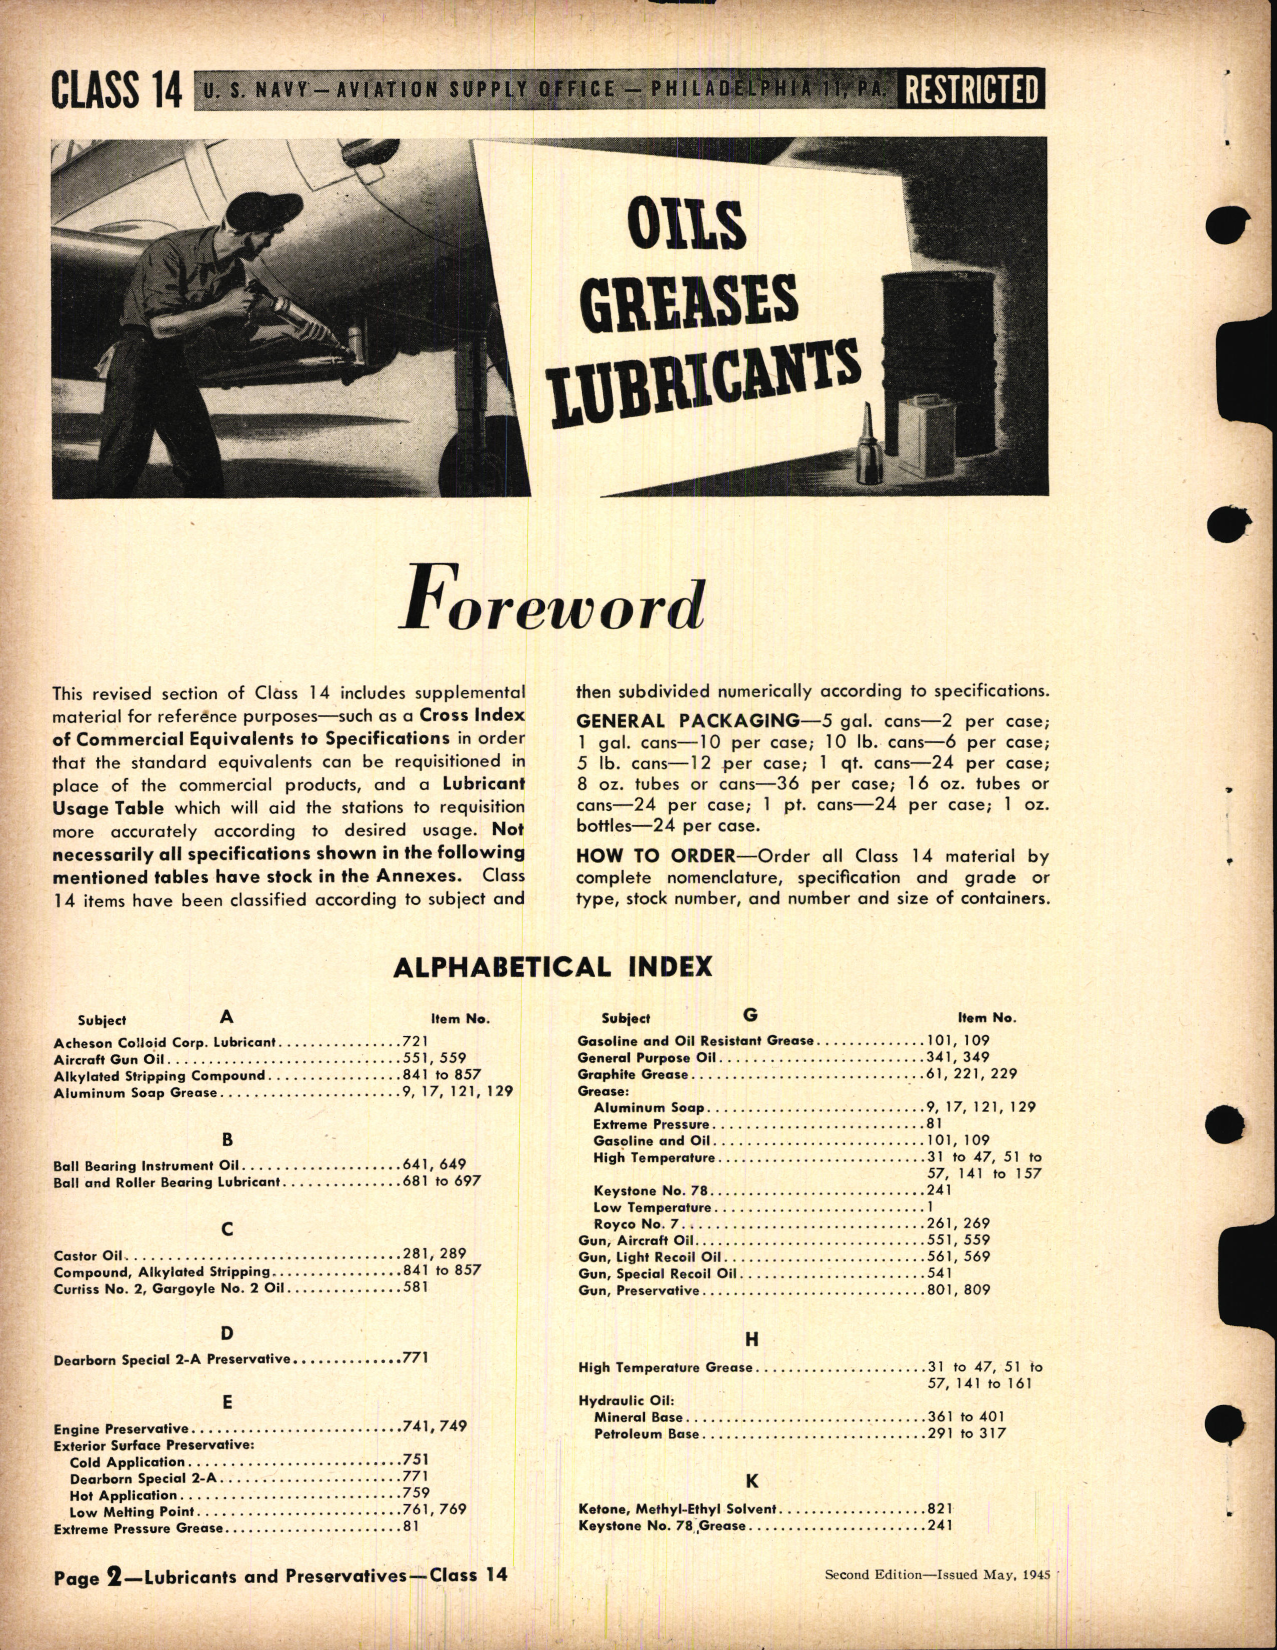 Sample page 2 from AirCorps Library document: Compounds, Greases, Lubricants, Oils, Preservatives, Solvent